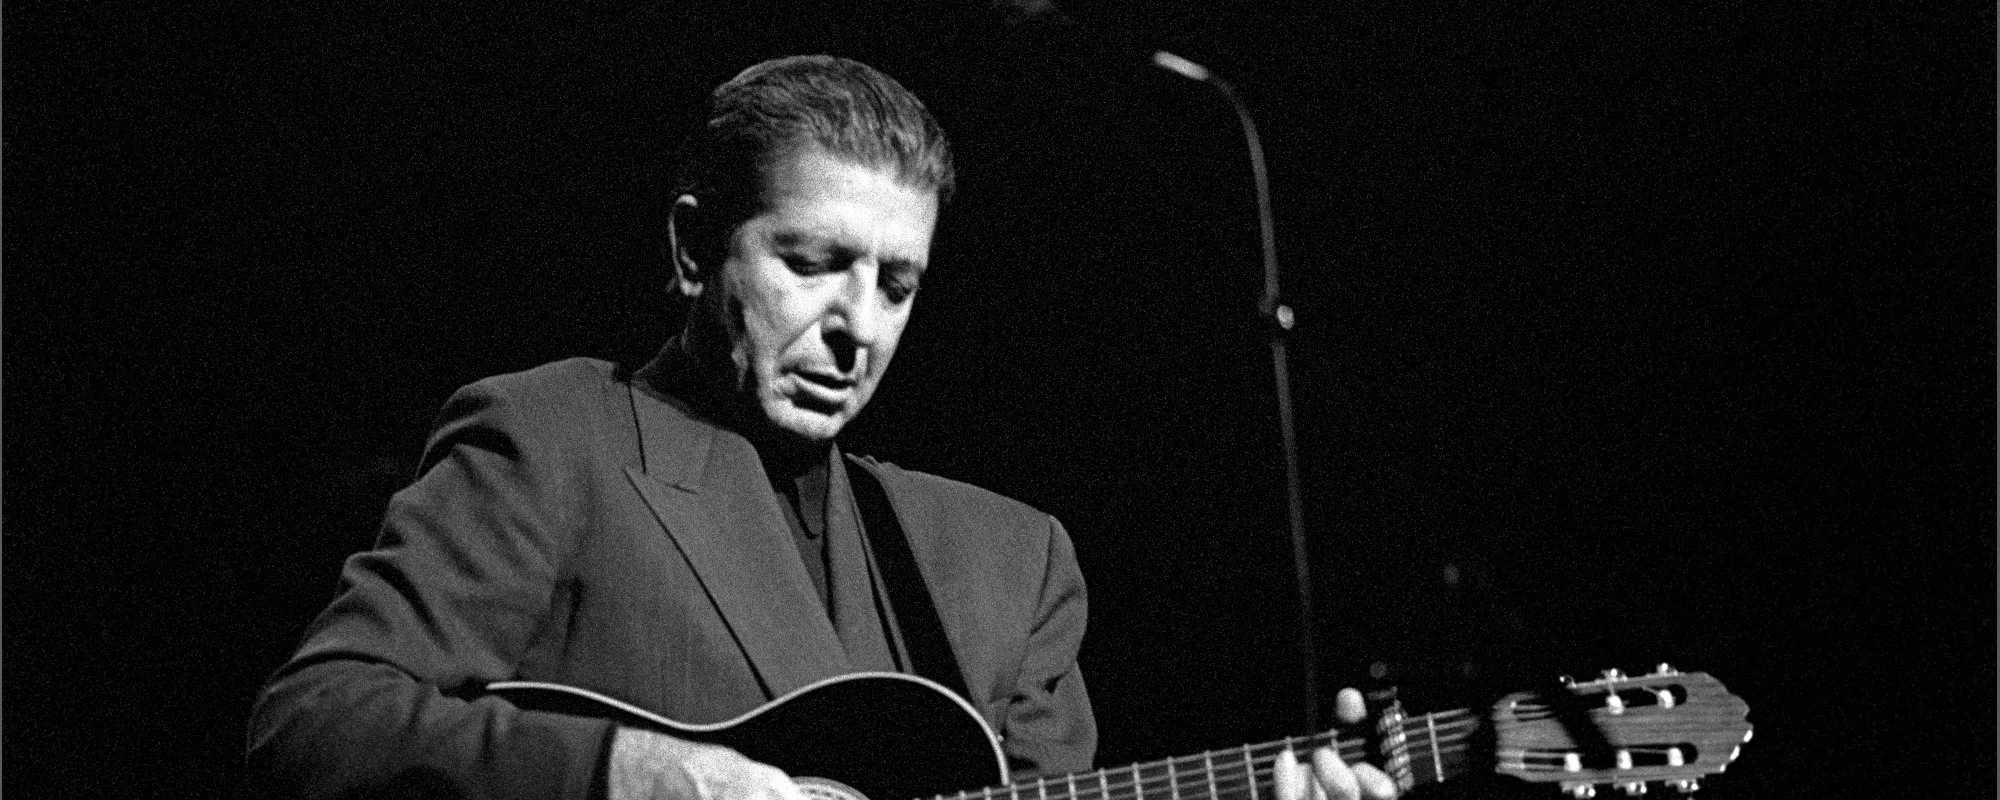 Who Wrote Leonard Cohen’s “The Partisan?”